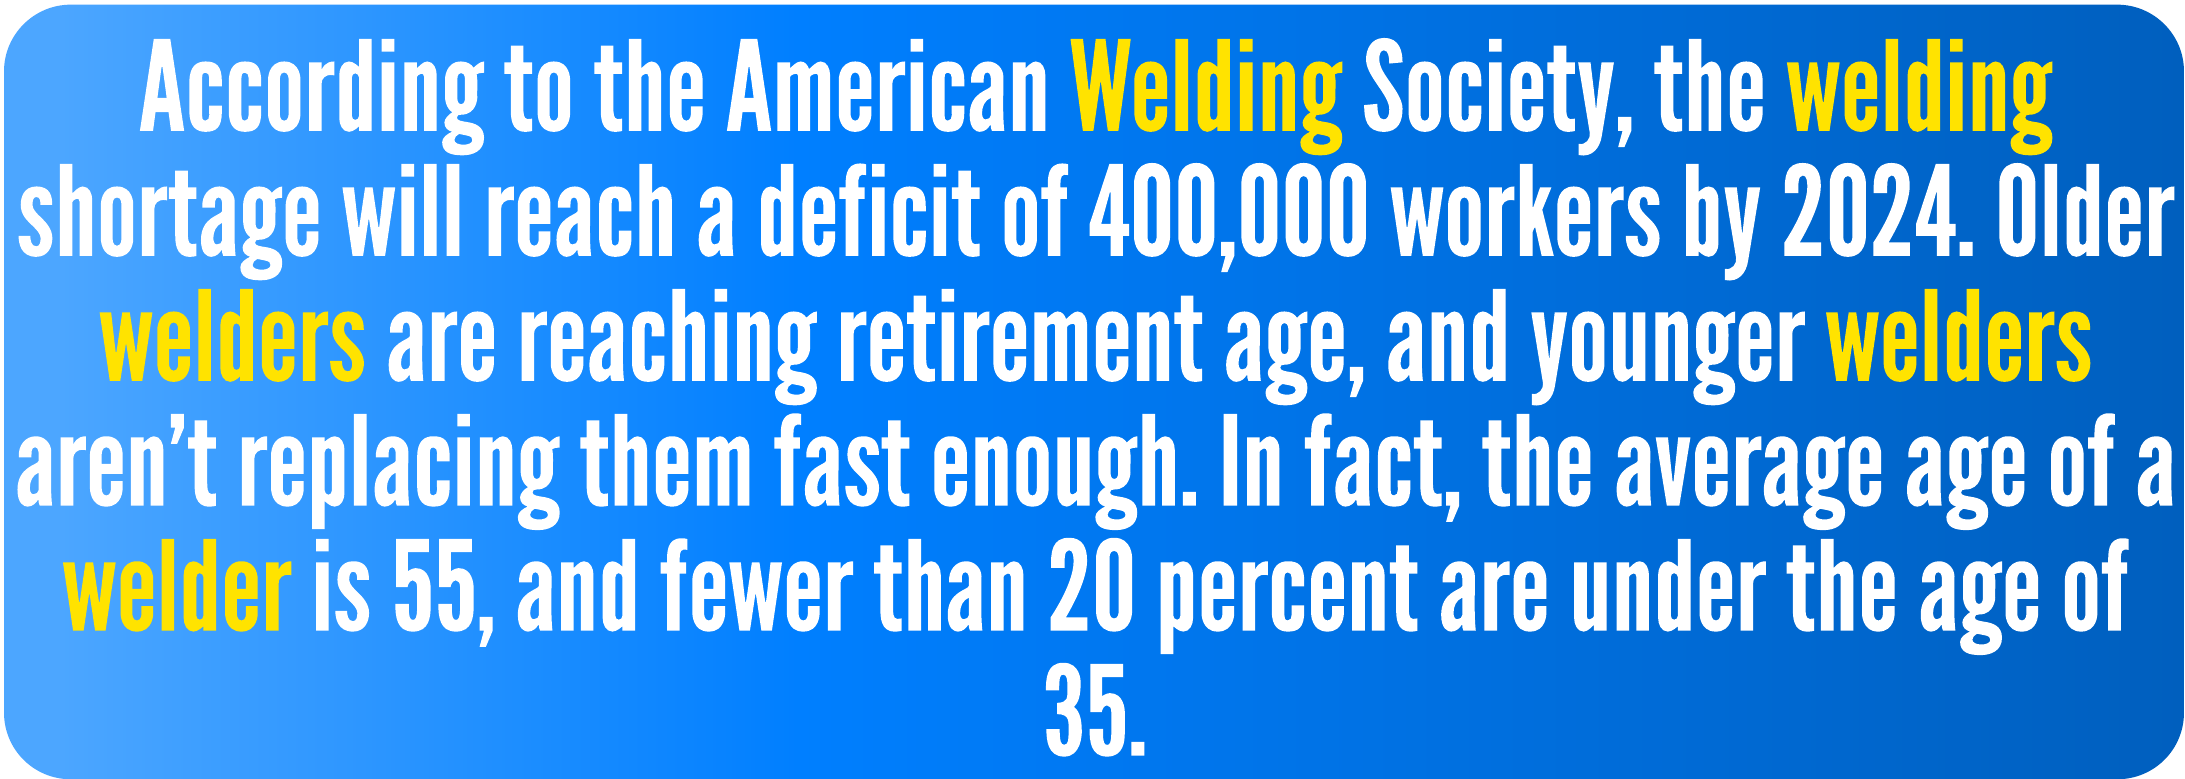 According to the American Welding Society, the welding shortage will reach a deficit of 400,000 workers by 2024. Older welders are reaching retirement age, and younger welders aren’t replacing them fast enough. In fact, the average age of a welder is 55, and fewer than 20 percent are under the age of 35.